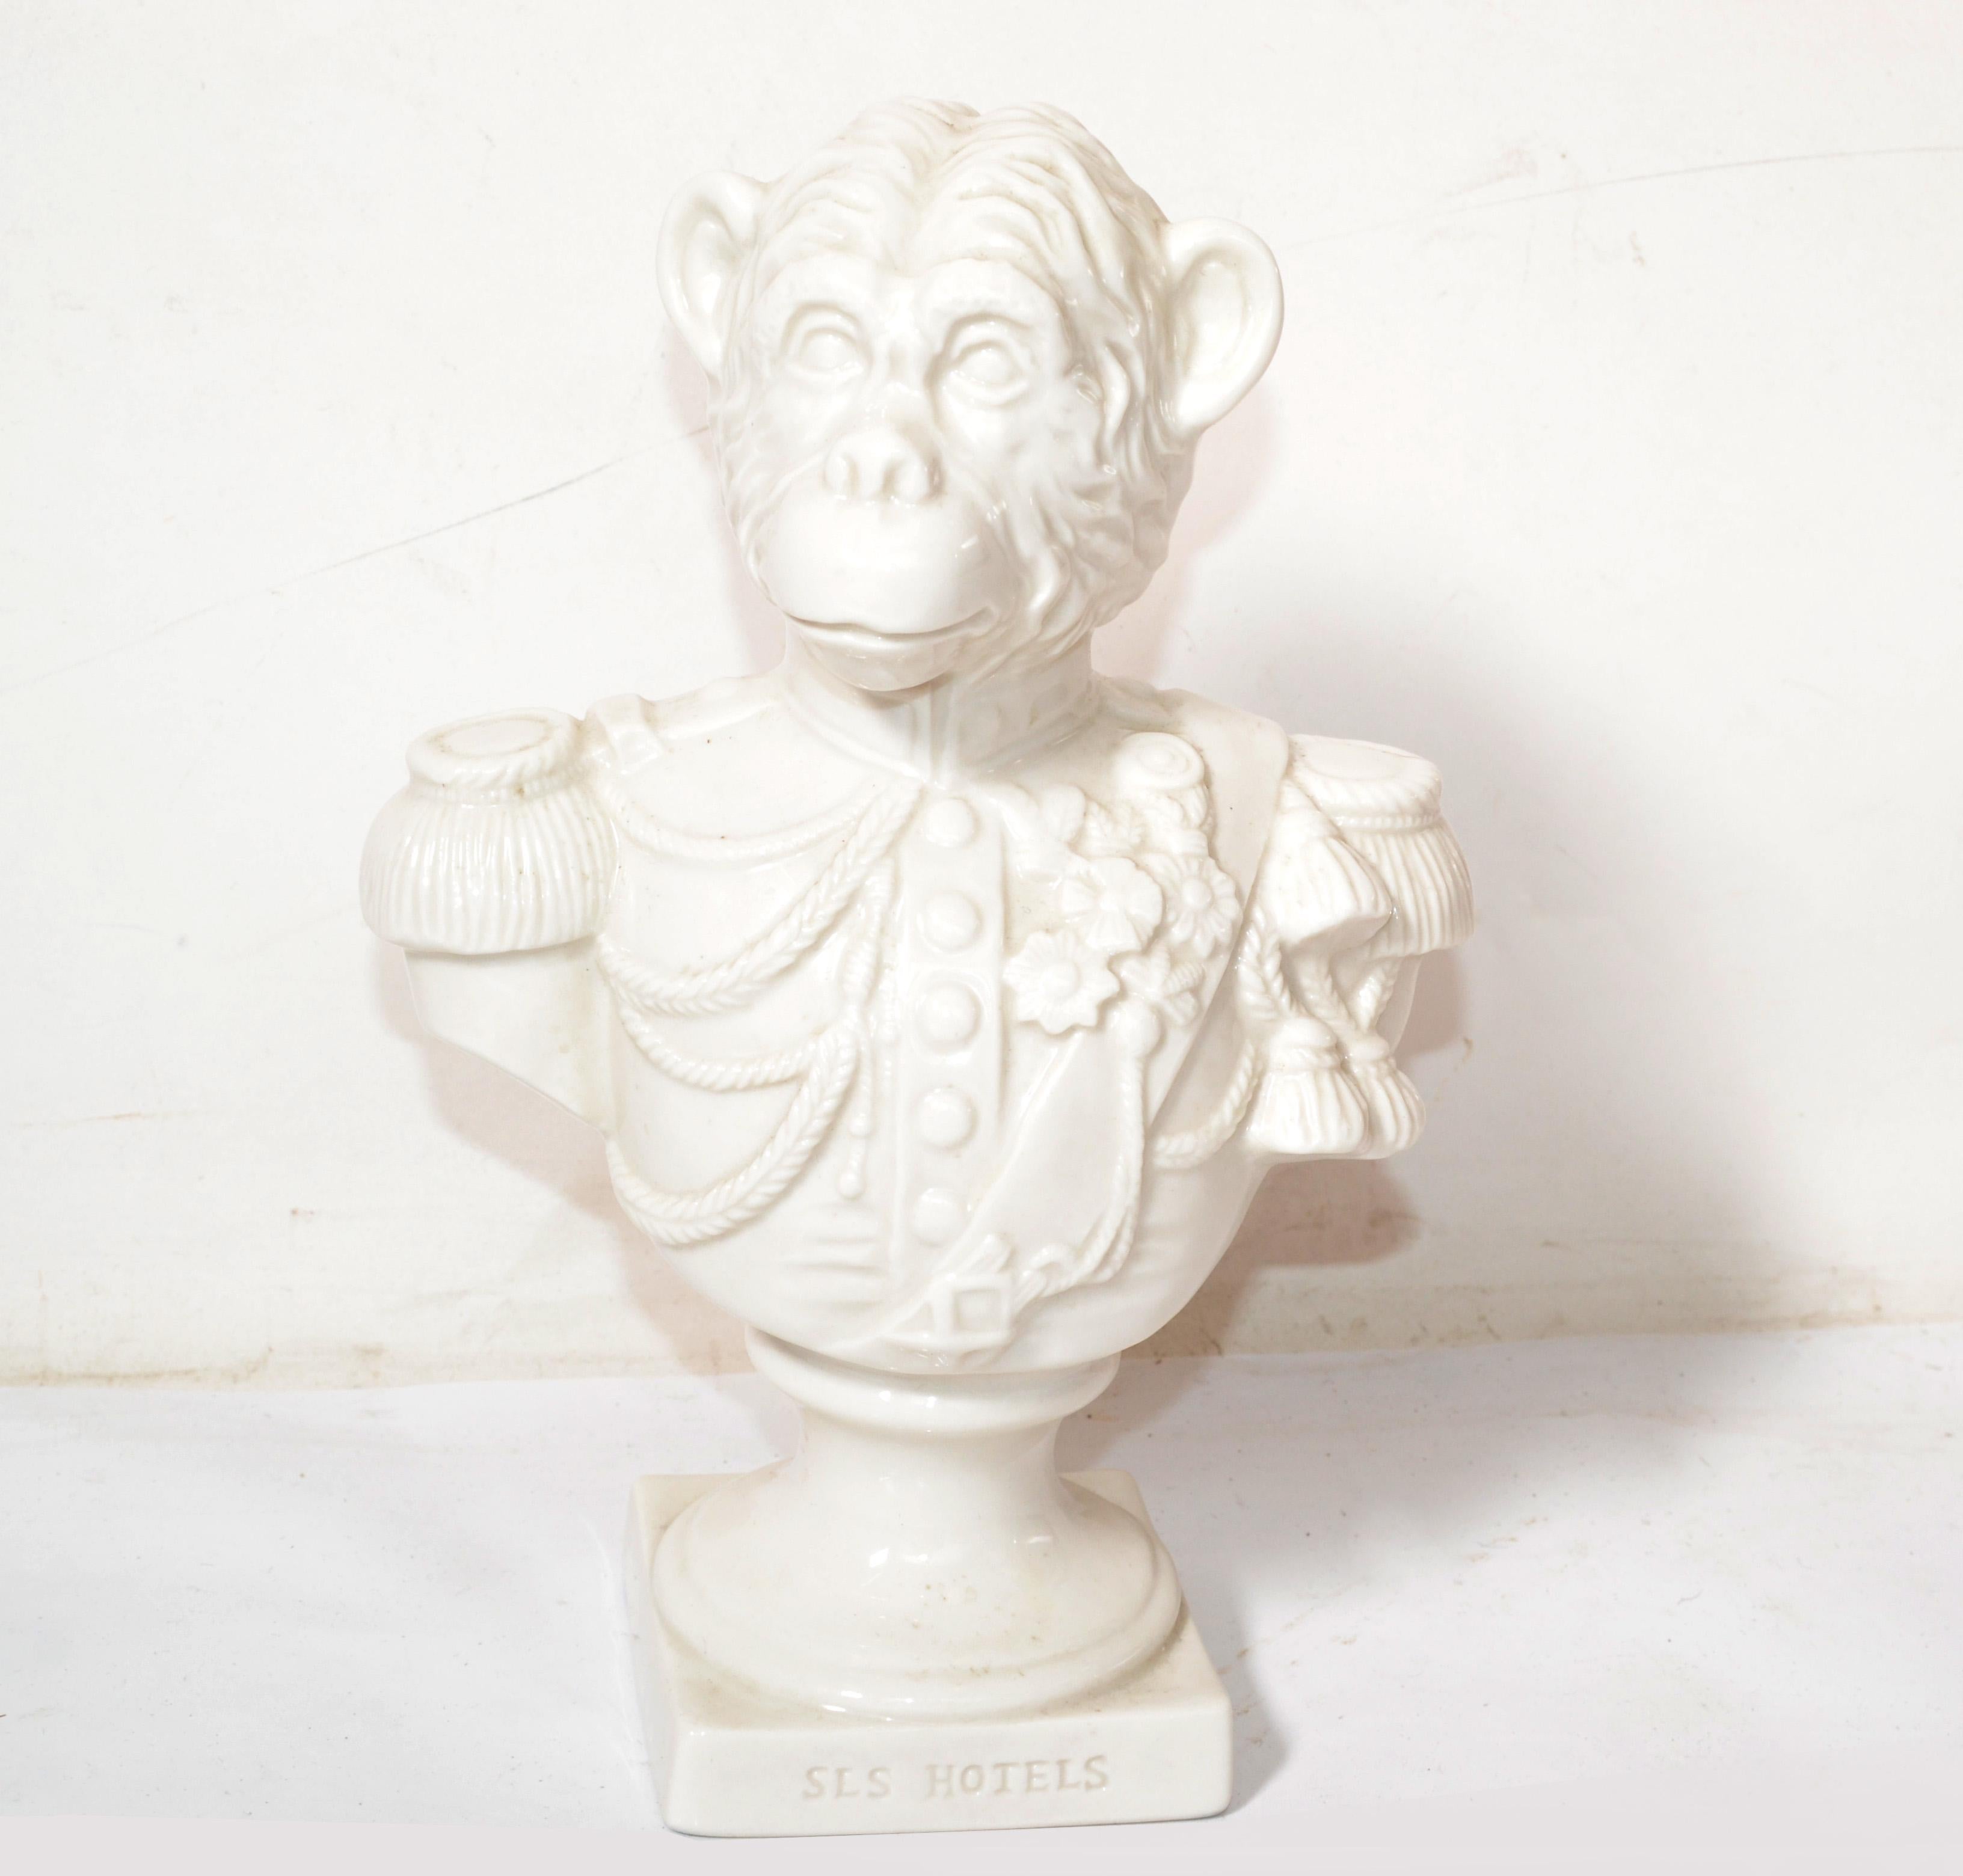 This Monkey bust by Cartoon Network is marked SLS Hotels.
It was designed for the SLS Hotels & Casino in Las Vegas. 
Made out of white Porcelain a cartoon monkey bust or Animal Sculpture.
In very good vintage condition, no breaks, chips, or